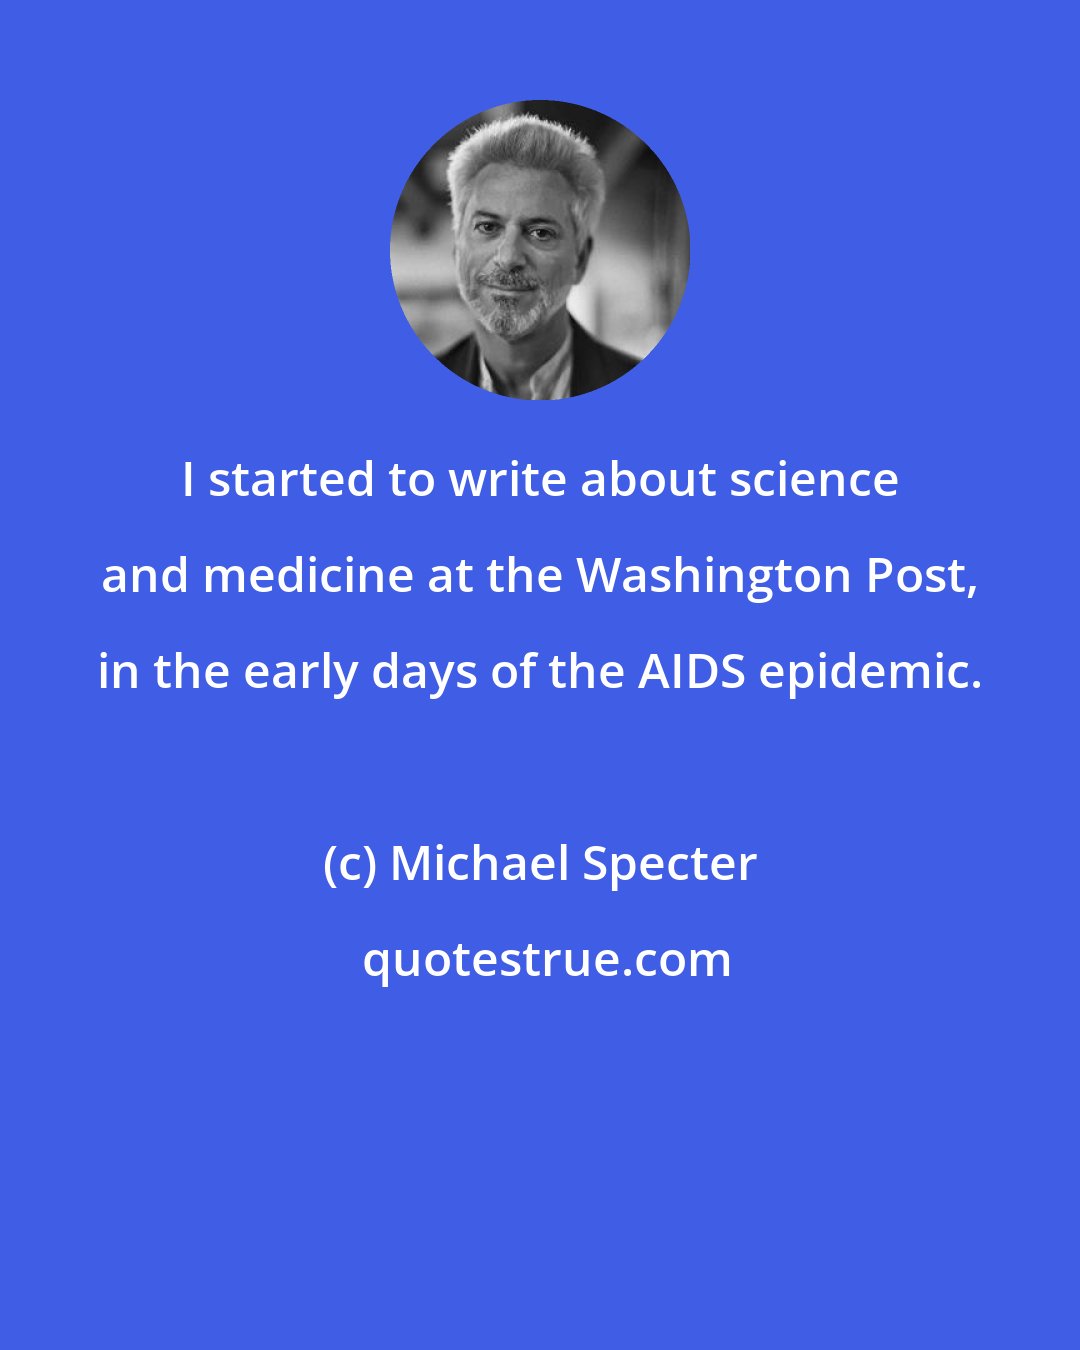 Michael Specter: I started to write about science and medicine at the Washington Post, in the early days of the AIDS epidemic.